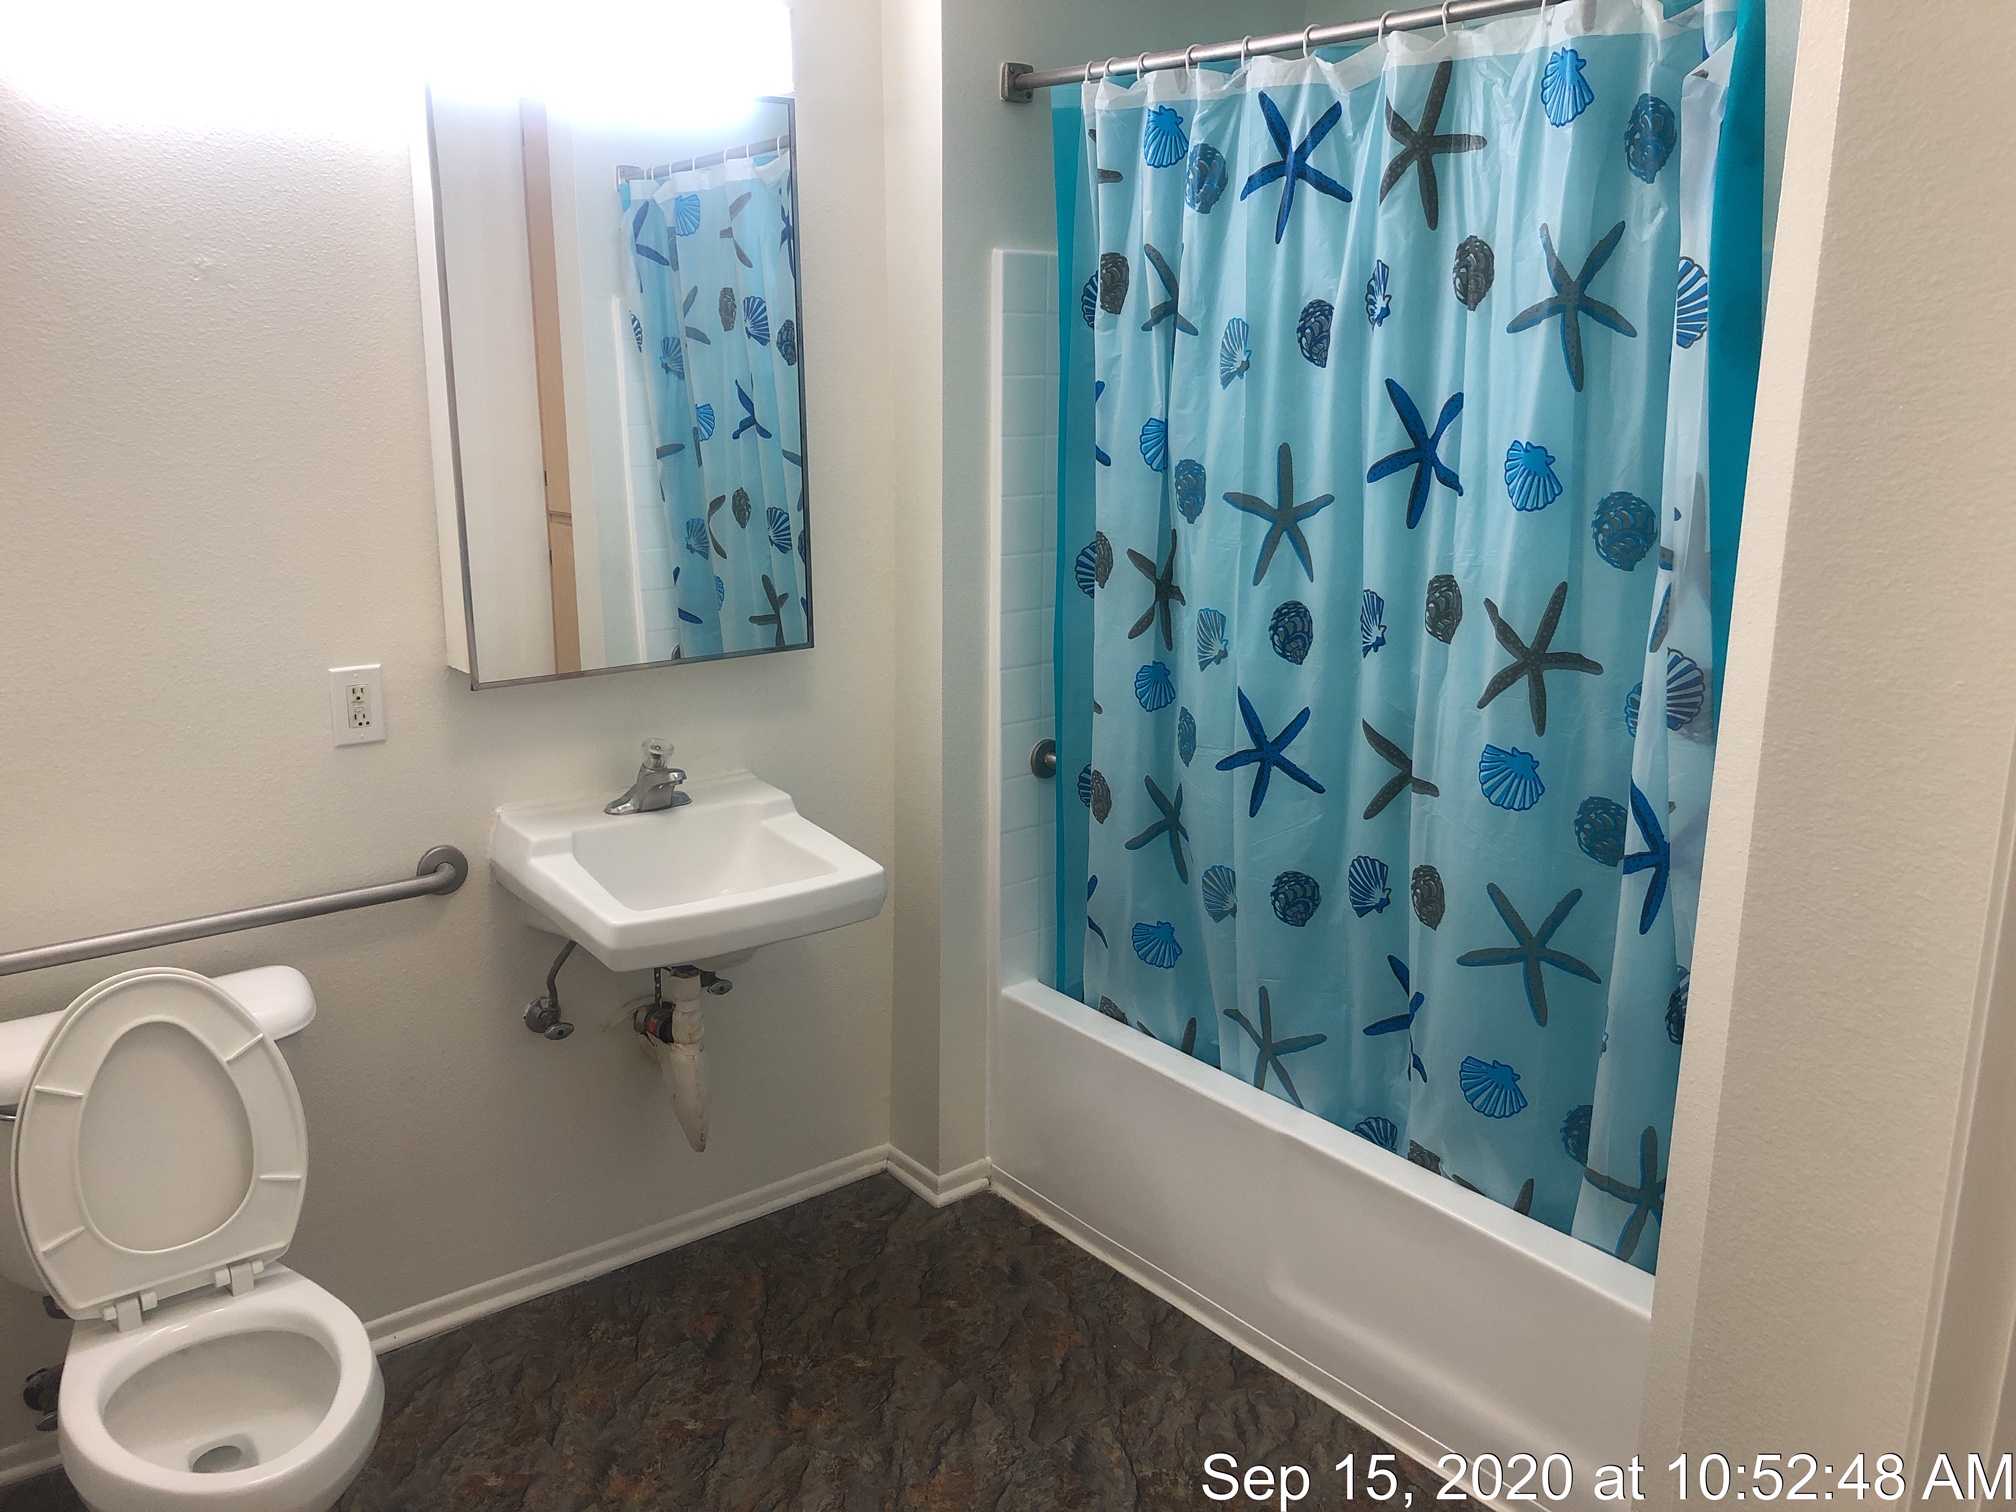 HFL Palms Court - View of a bathroom with a toilet, sink, medicine cabinet with a mirror and bathtub with a shower rod and curtain.